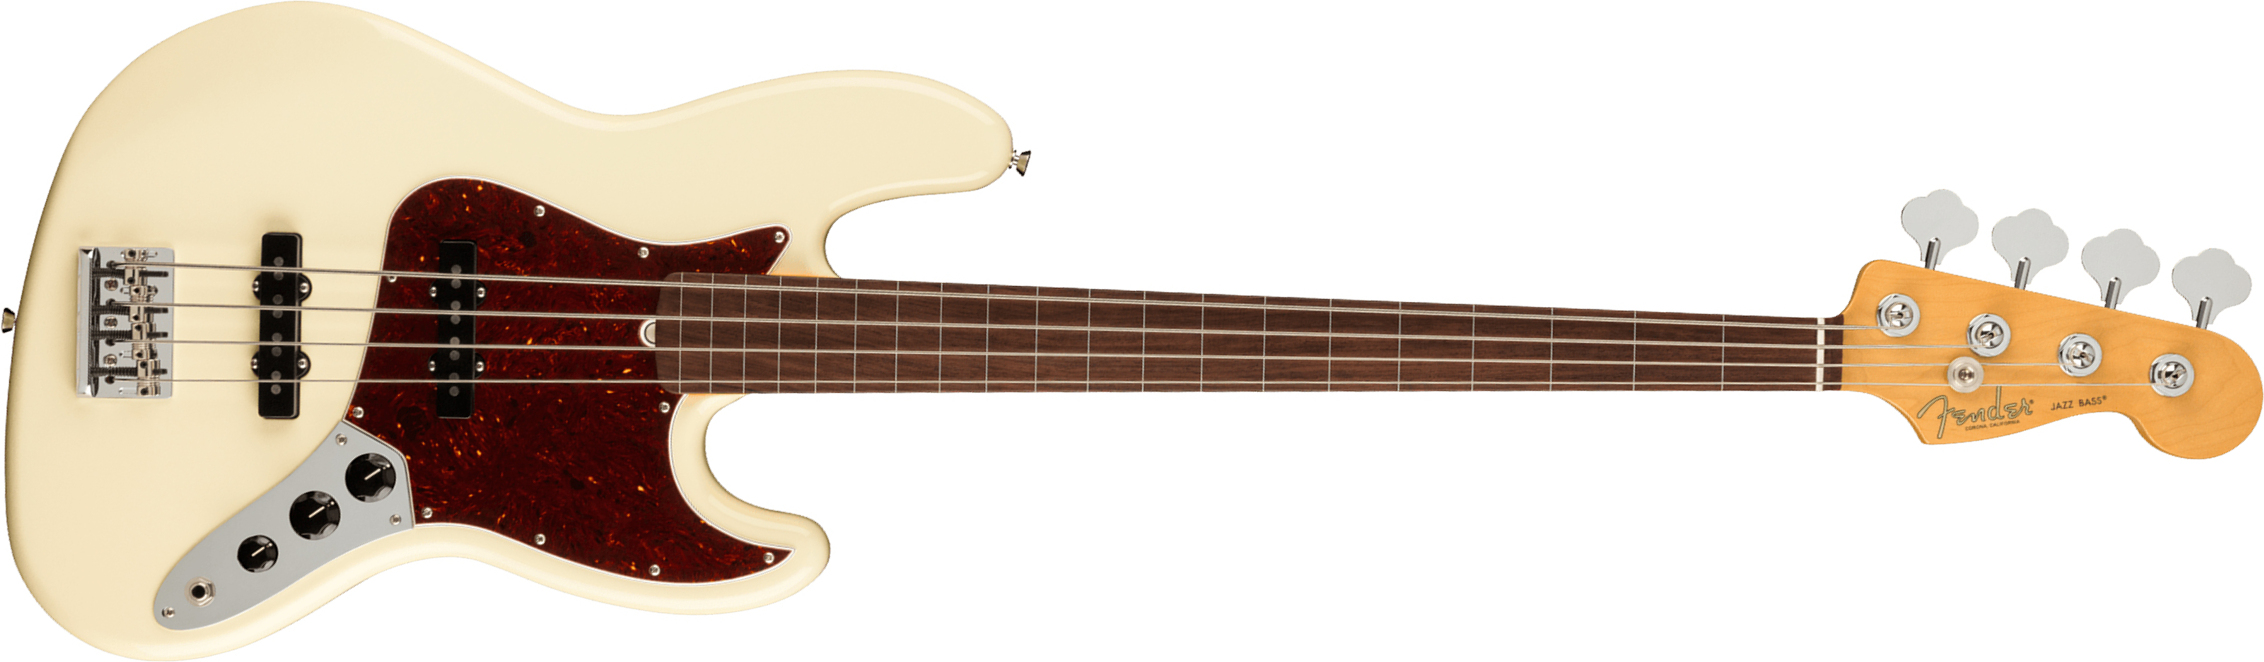 Fender Jazz Bass Fretless American Professional Ii Usa Rw - Olympic White - Basse Électrique Solid Body - Main picture